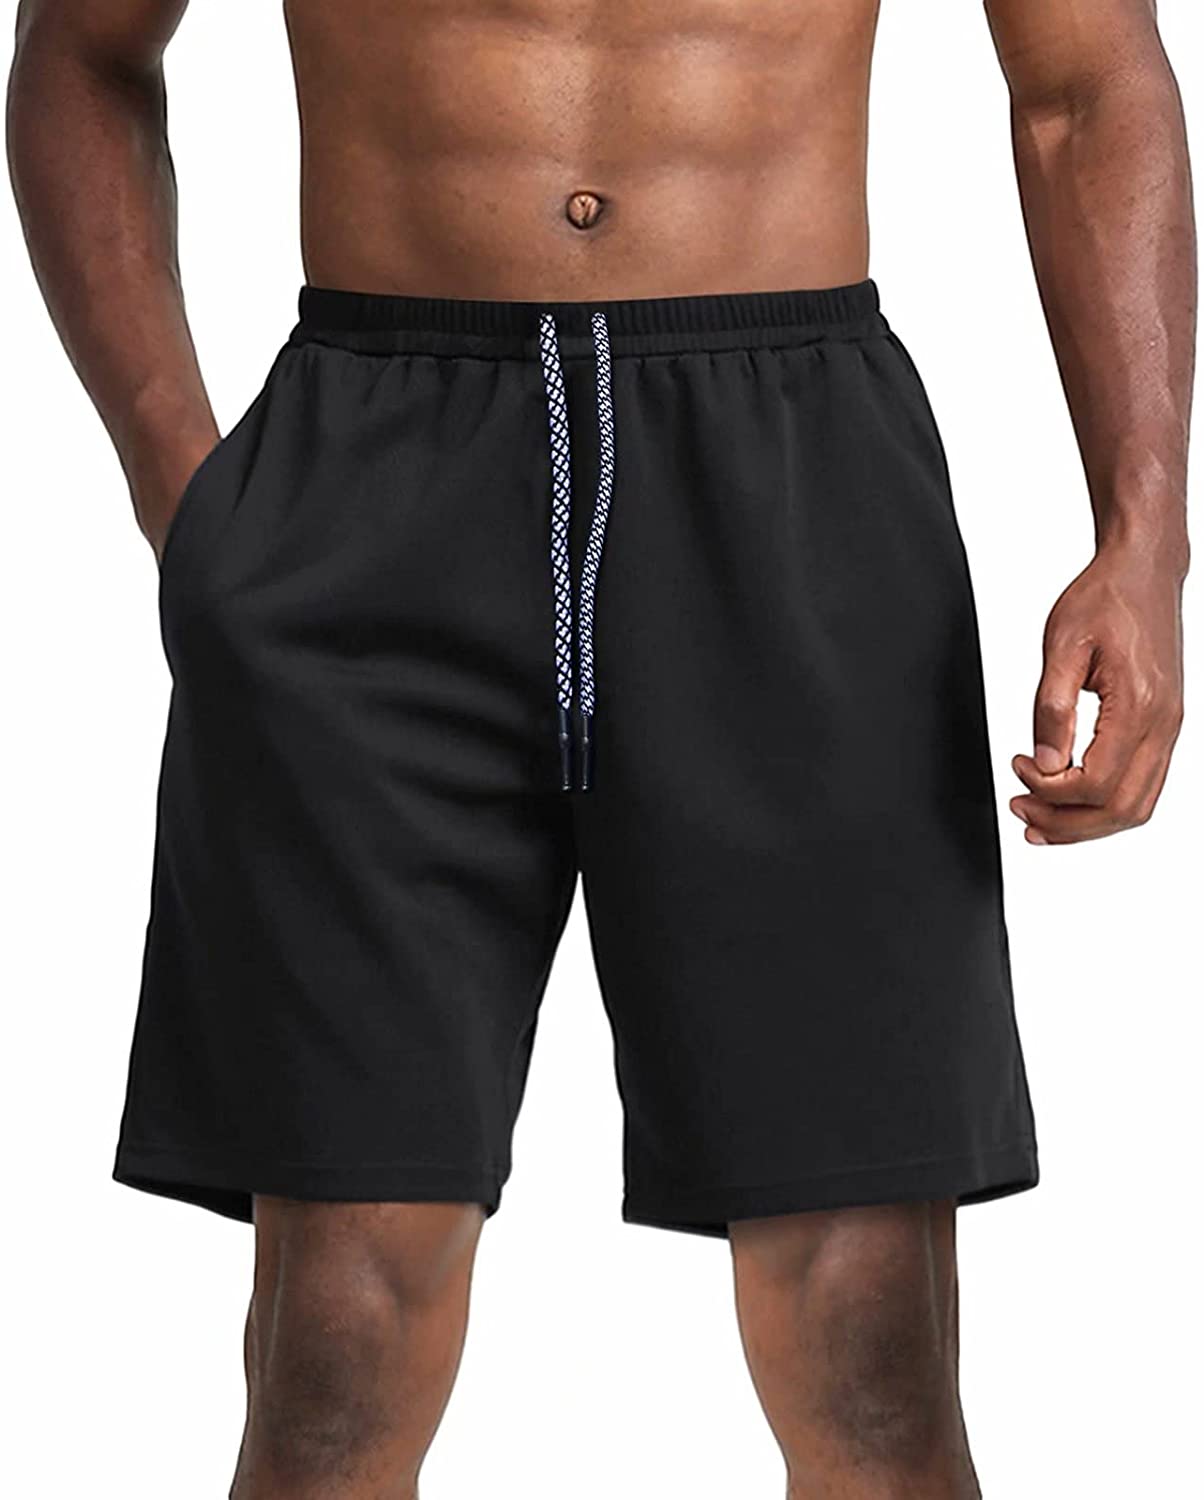 MAGNIVIT Men's Lightweight Mesh Shorts with Pockets Breathable Running Workout Gym Shorts